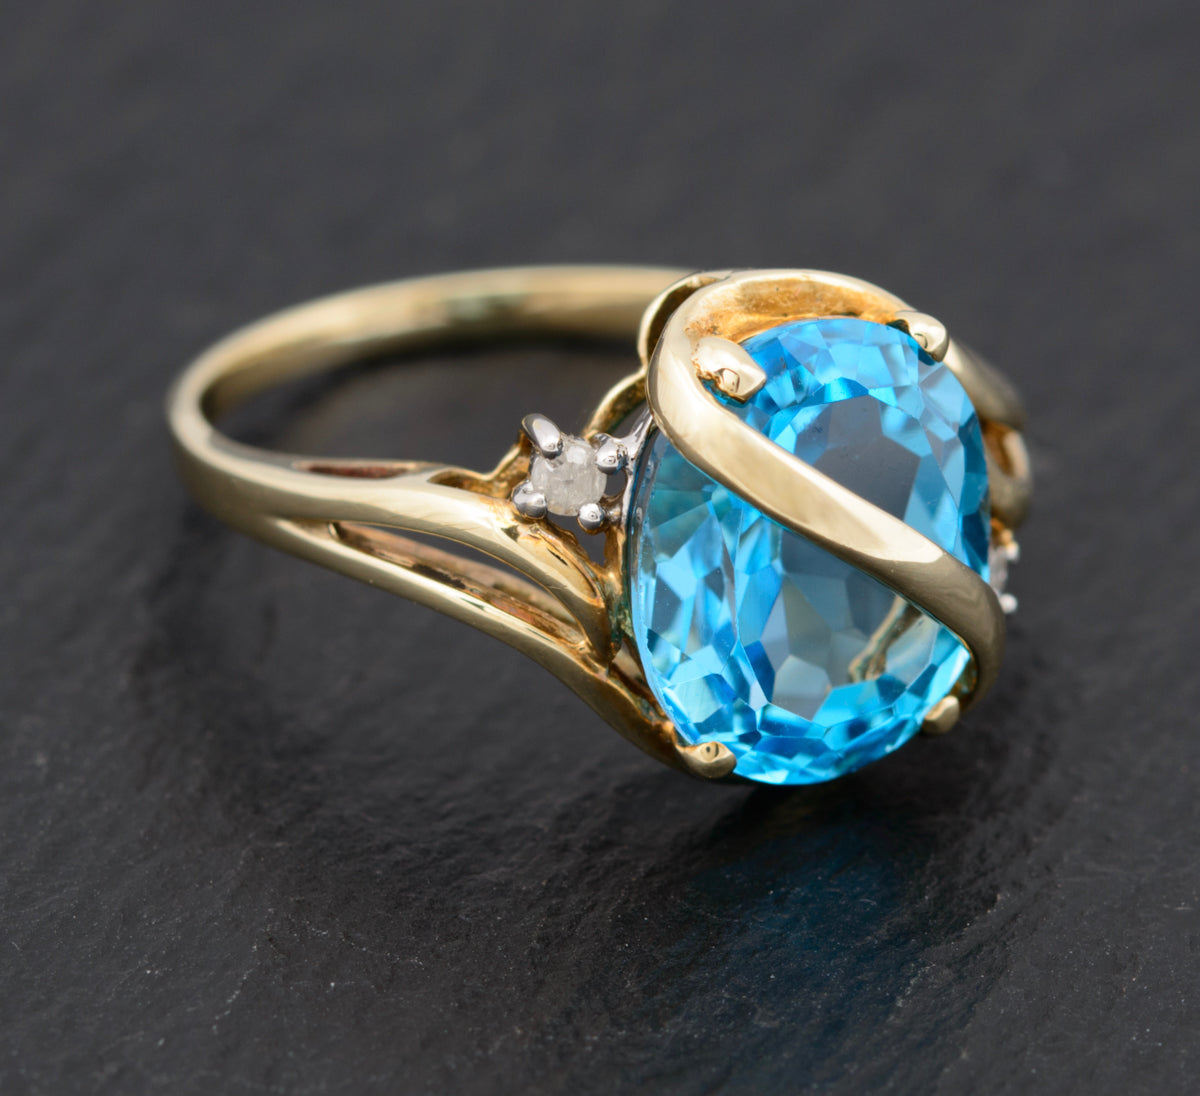 Baby Swiss Blue Topaz Gemstone Ring In 9ct Gold With Wrap Over Mount (A1463)